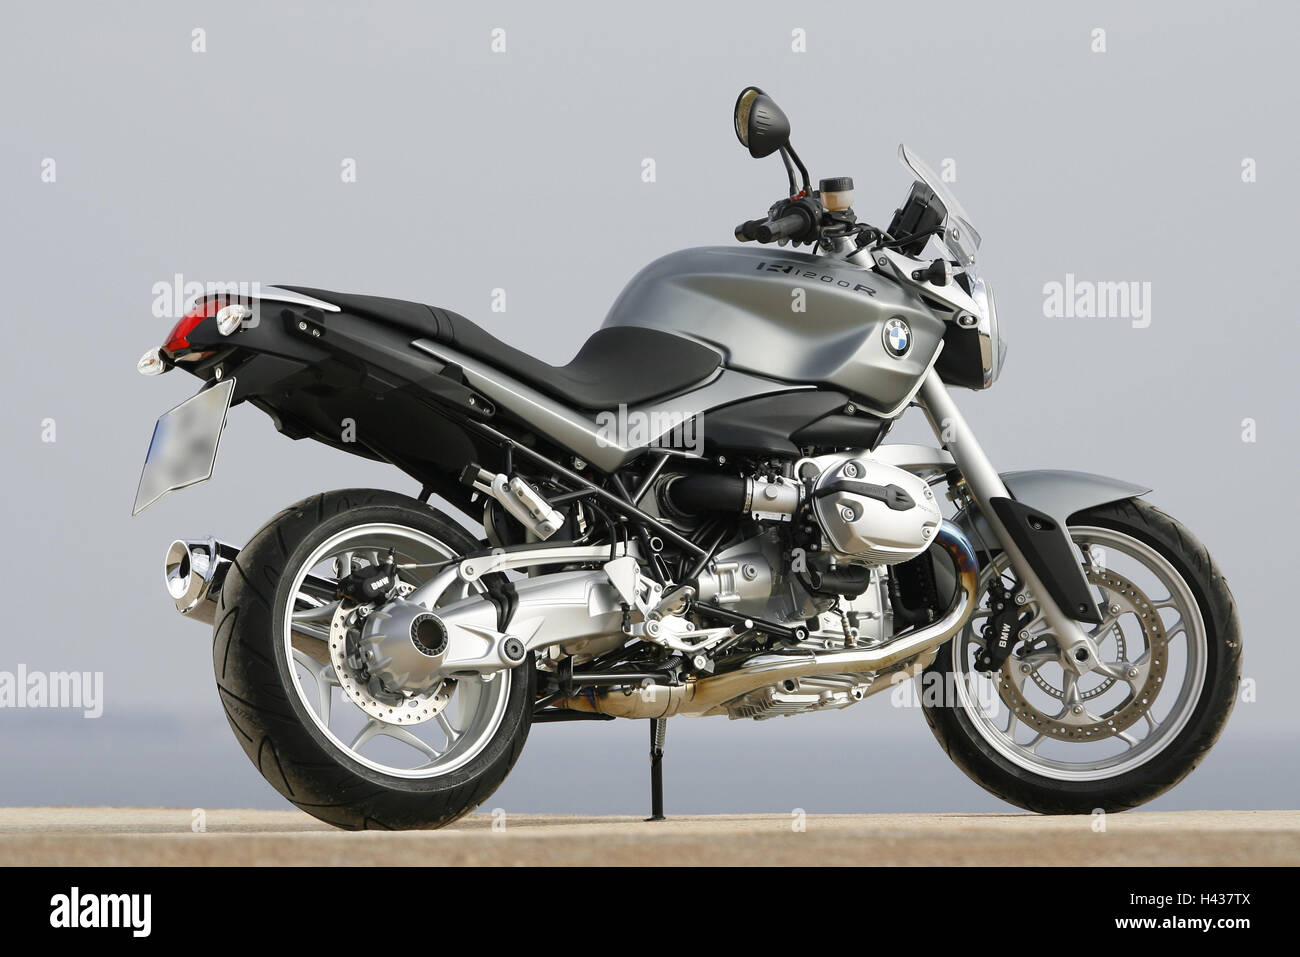 Two-cylinders VT, BMW R 1200 R, standard, preview, BMW R-1200-R, motorcycle, standard, stand, outside, nobody, Stock Photo